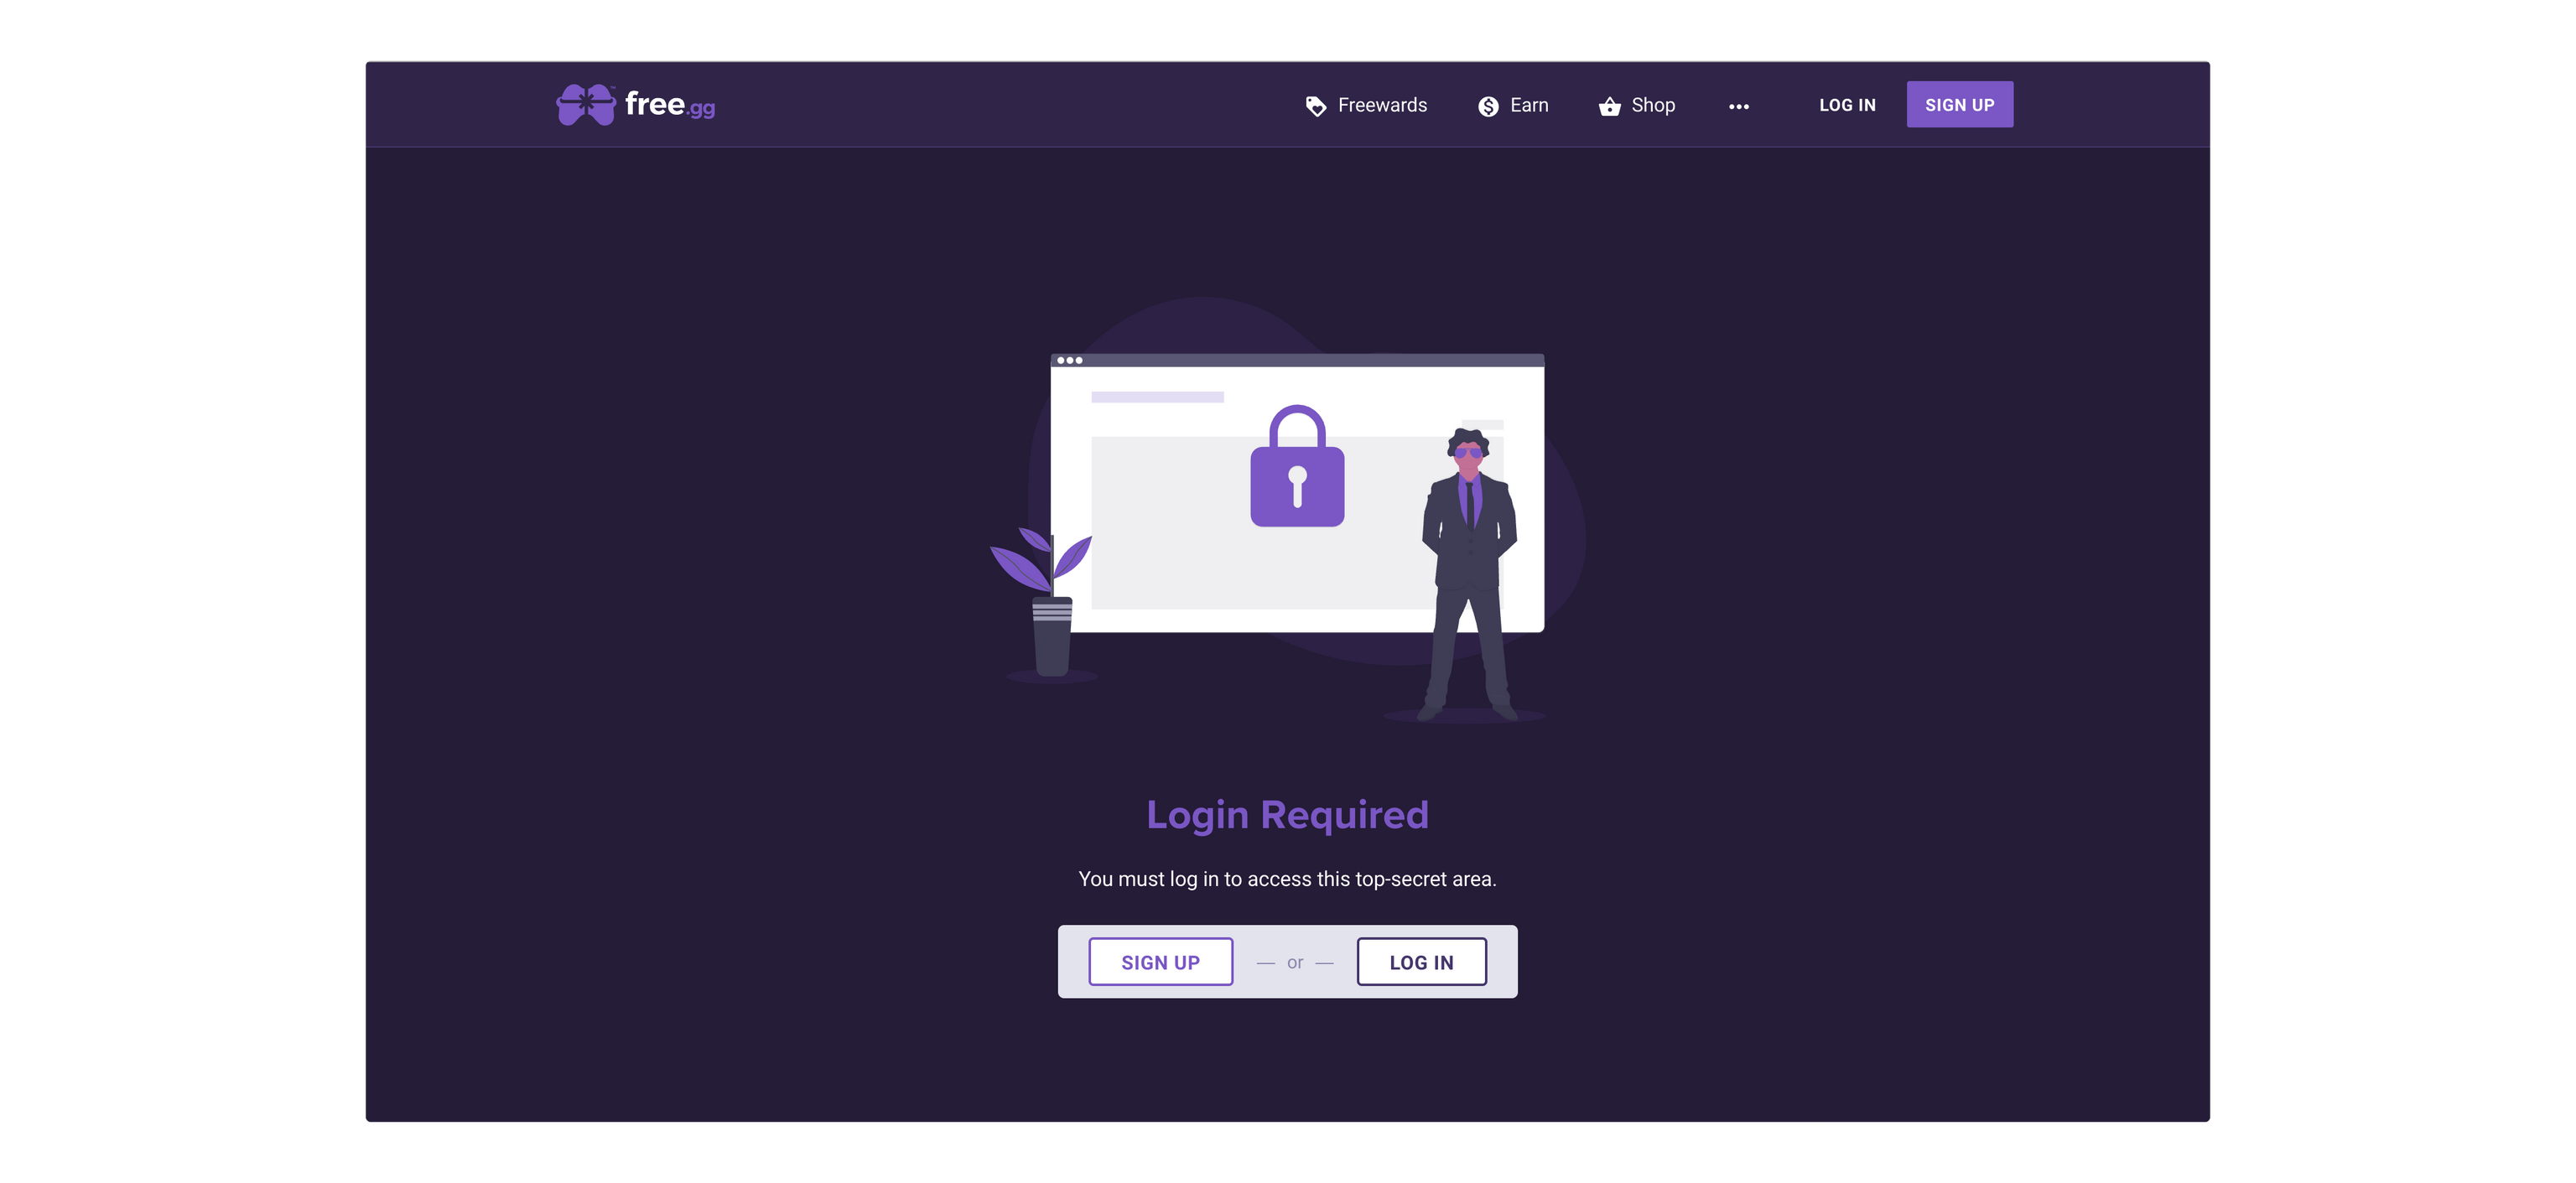 Page: Login Required